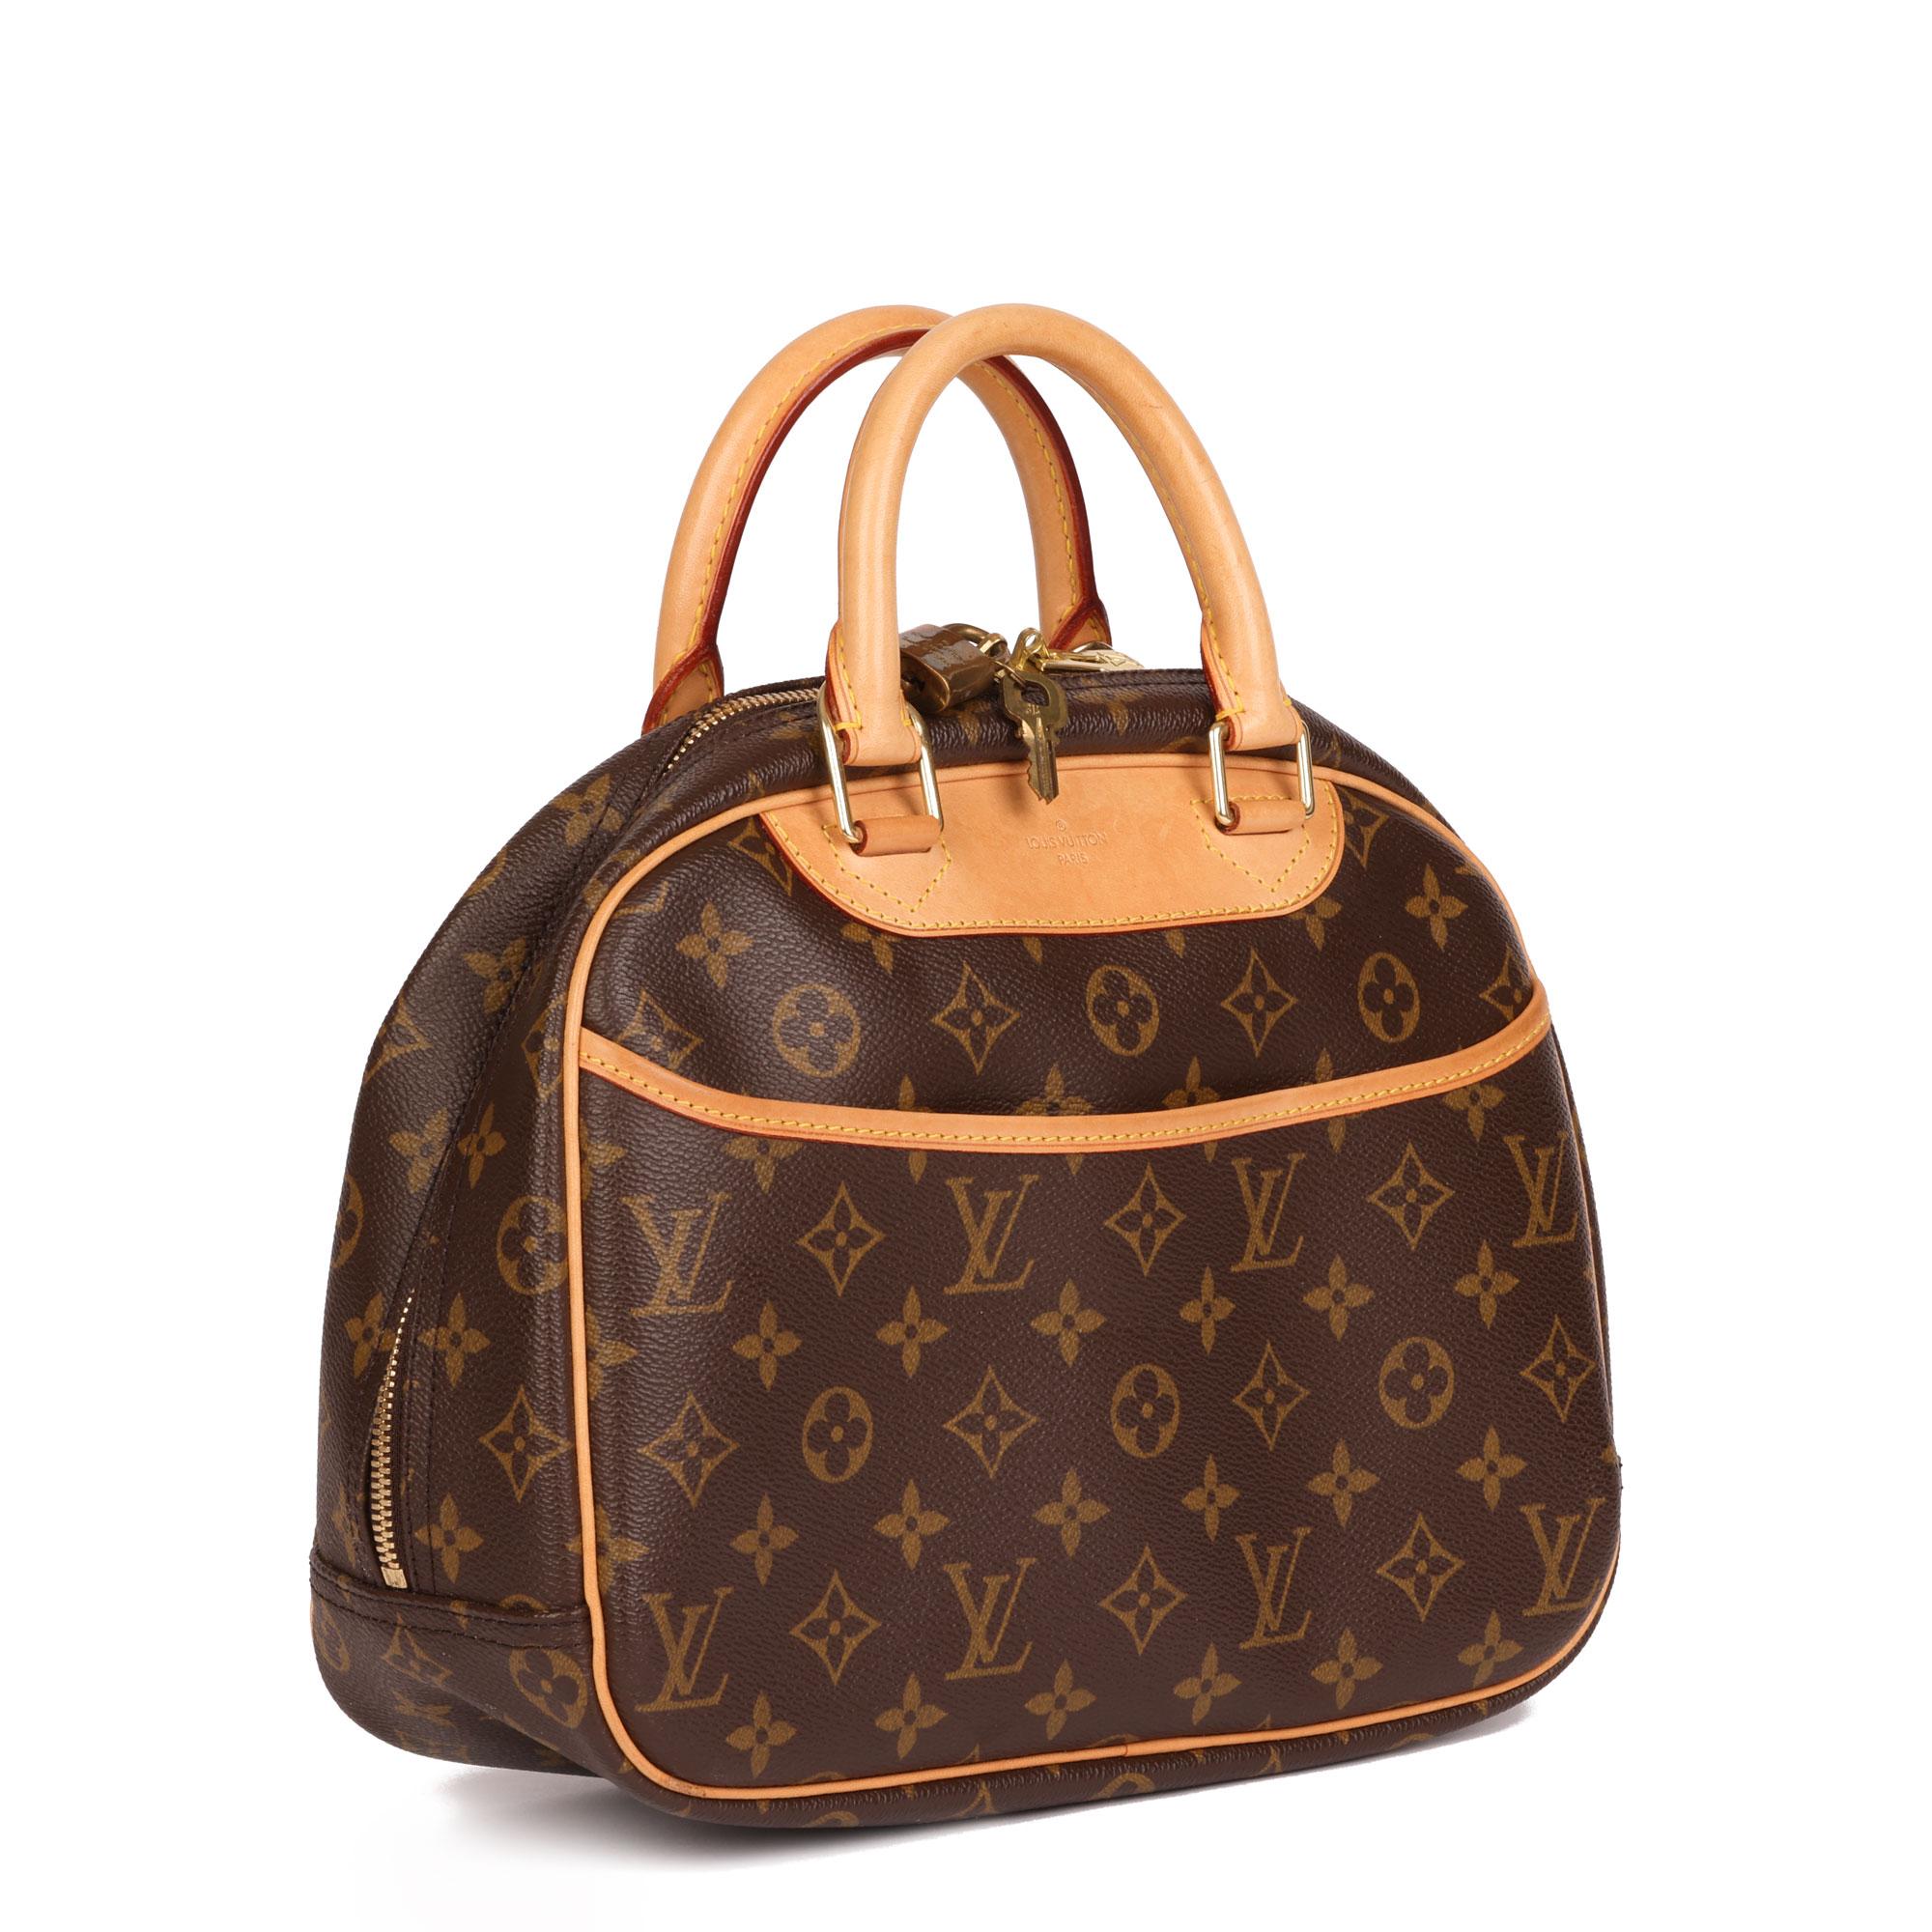 LOUIS VUITTON
Brown Monogram Coated Canvas & Vachetta Leather Trouville

Xupes Reference: HB4696
Serial Number: SD0055
Age (Circa): 2005
Accompanied By: Louis Vuitton Dust Bag, Padlock, Keys
Authenticity Details: Date Stamp (Made in France)
Gender: